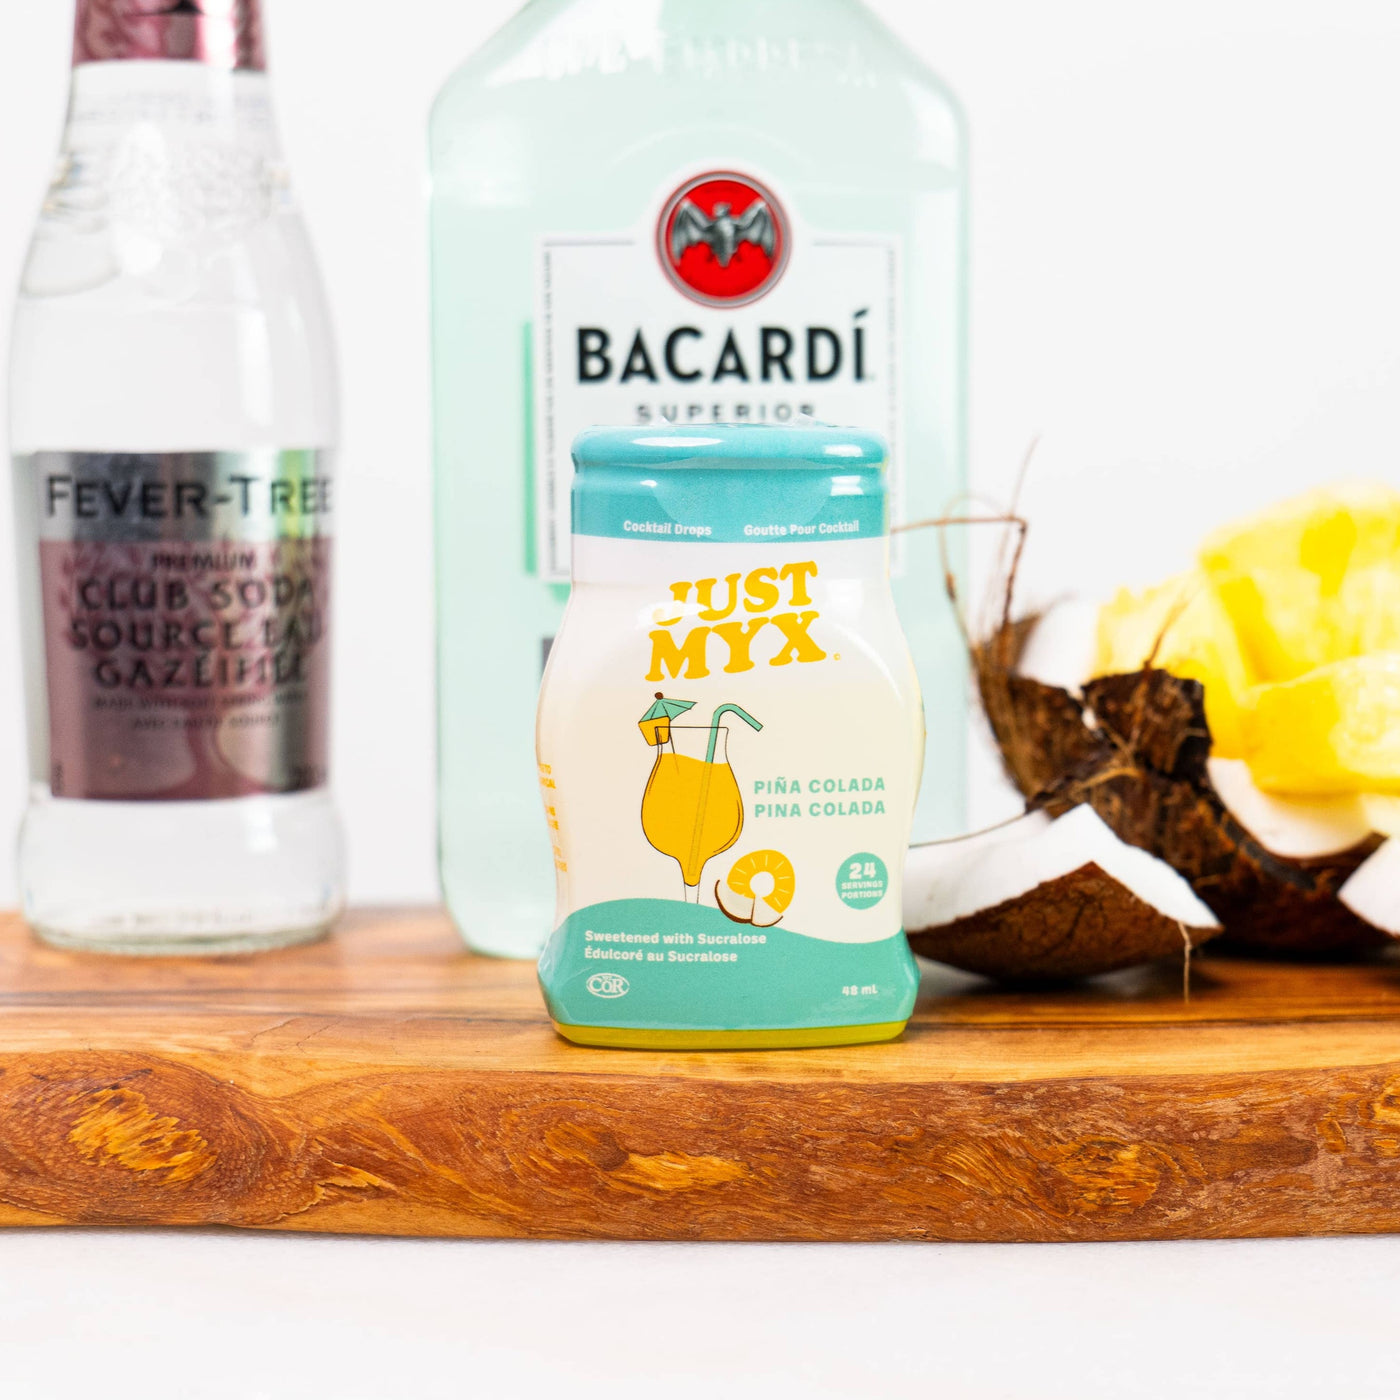 JustMyx Cocktail Drops | Pina Colada, The Local Space, Local Canadian Brands